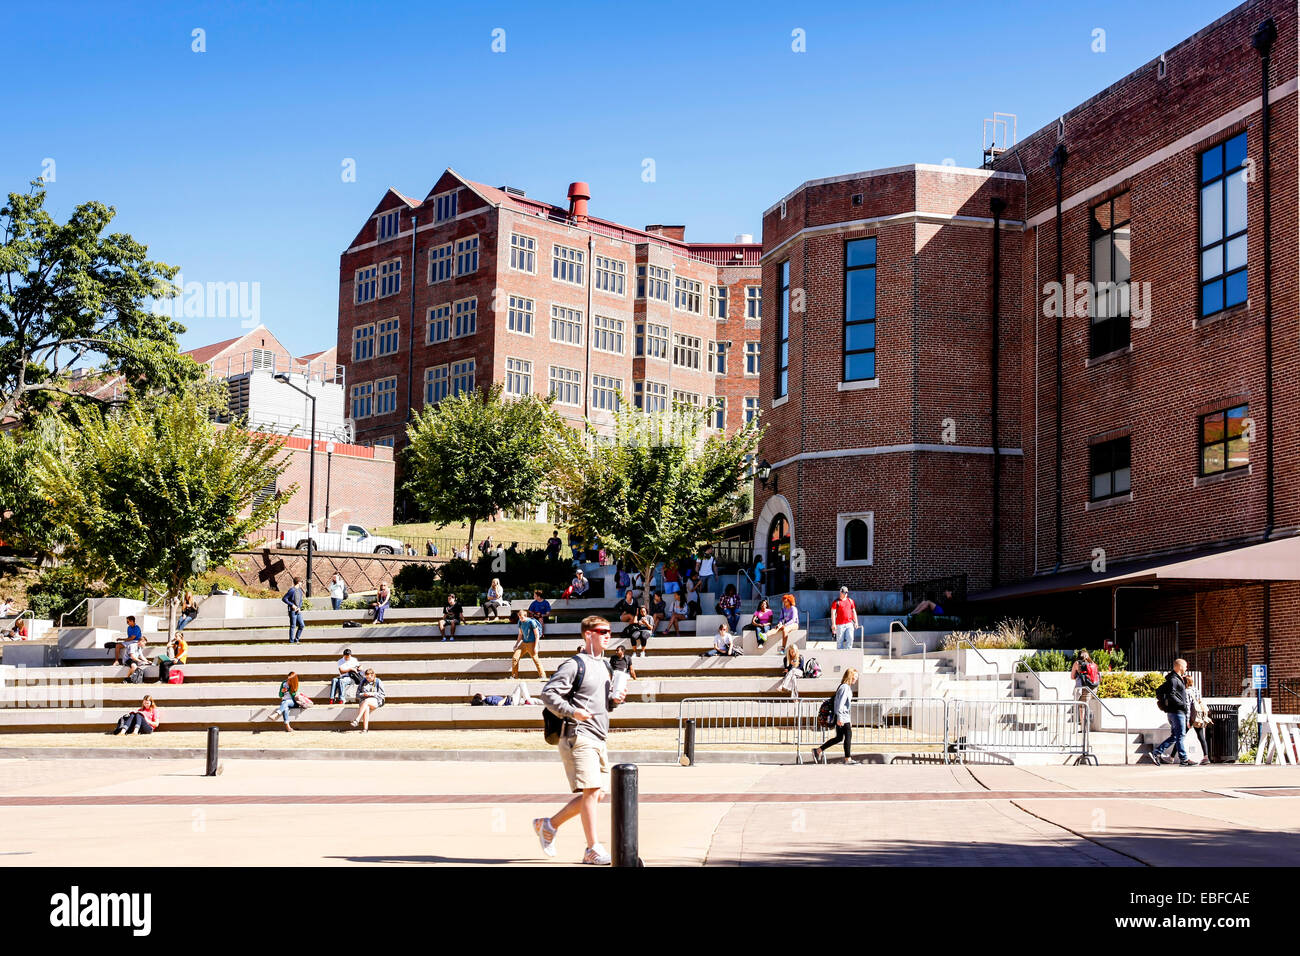 The old campus buildings on the hill at the University of Tennessee Stock Photo